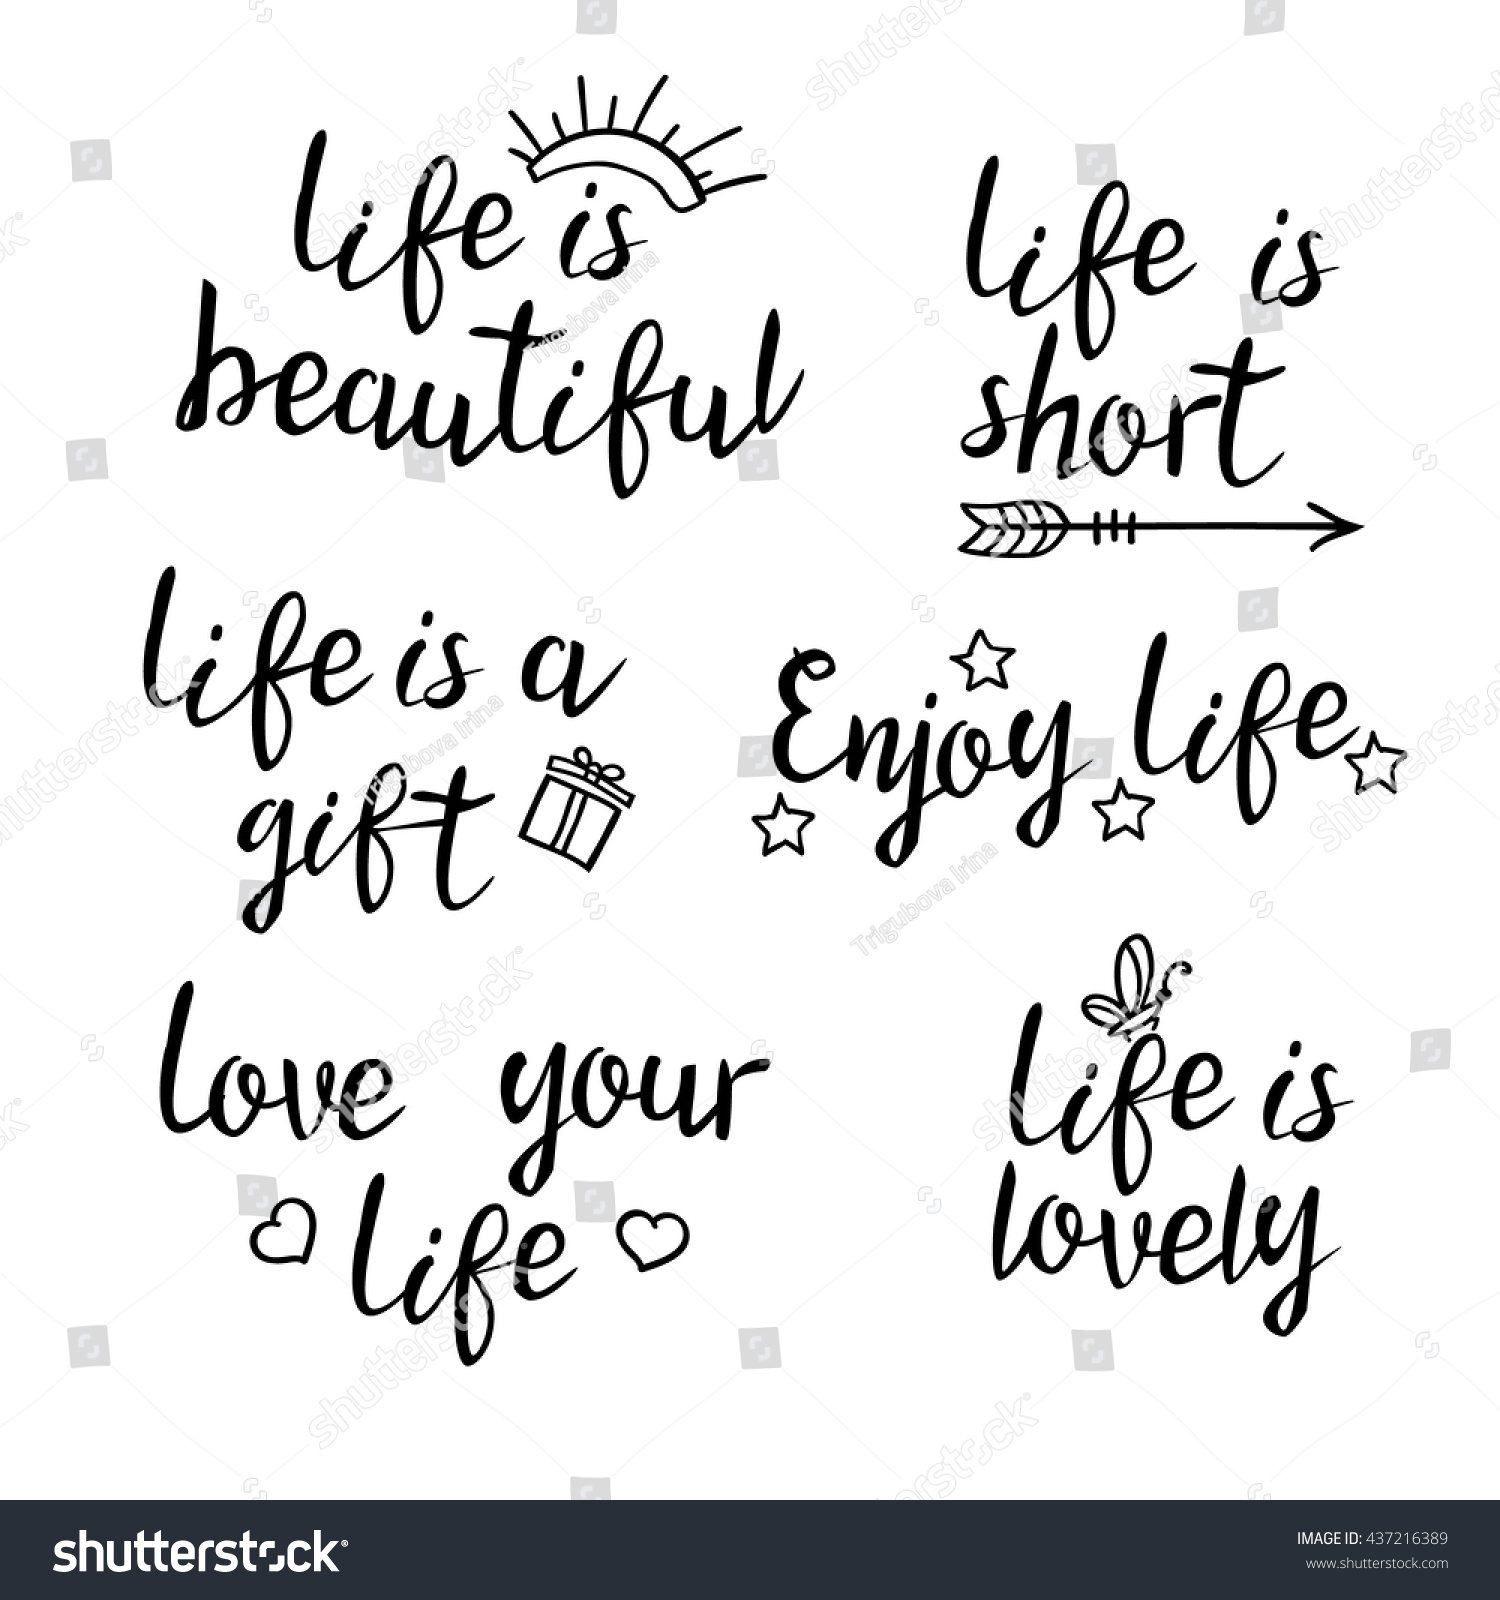 Lettering life quotes Calligraphy Inspirational quote about life For postcard poster graphic design Life is beautiful short lovely Enjoy and love your